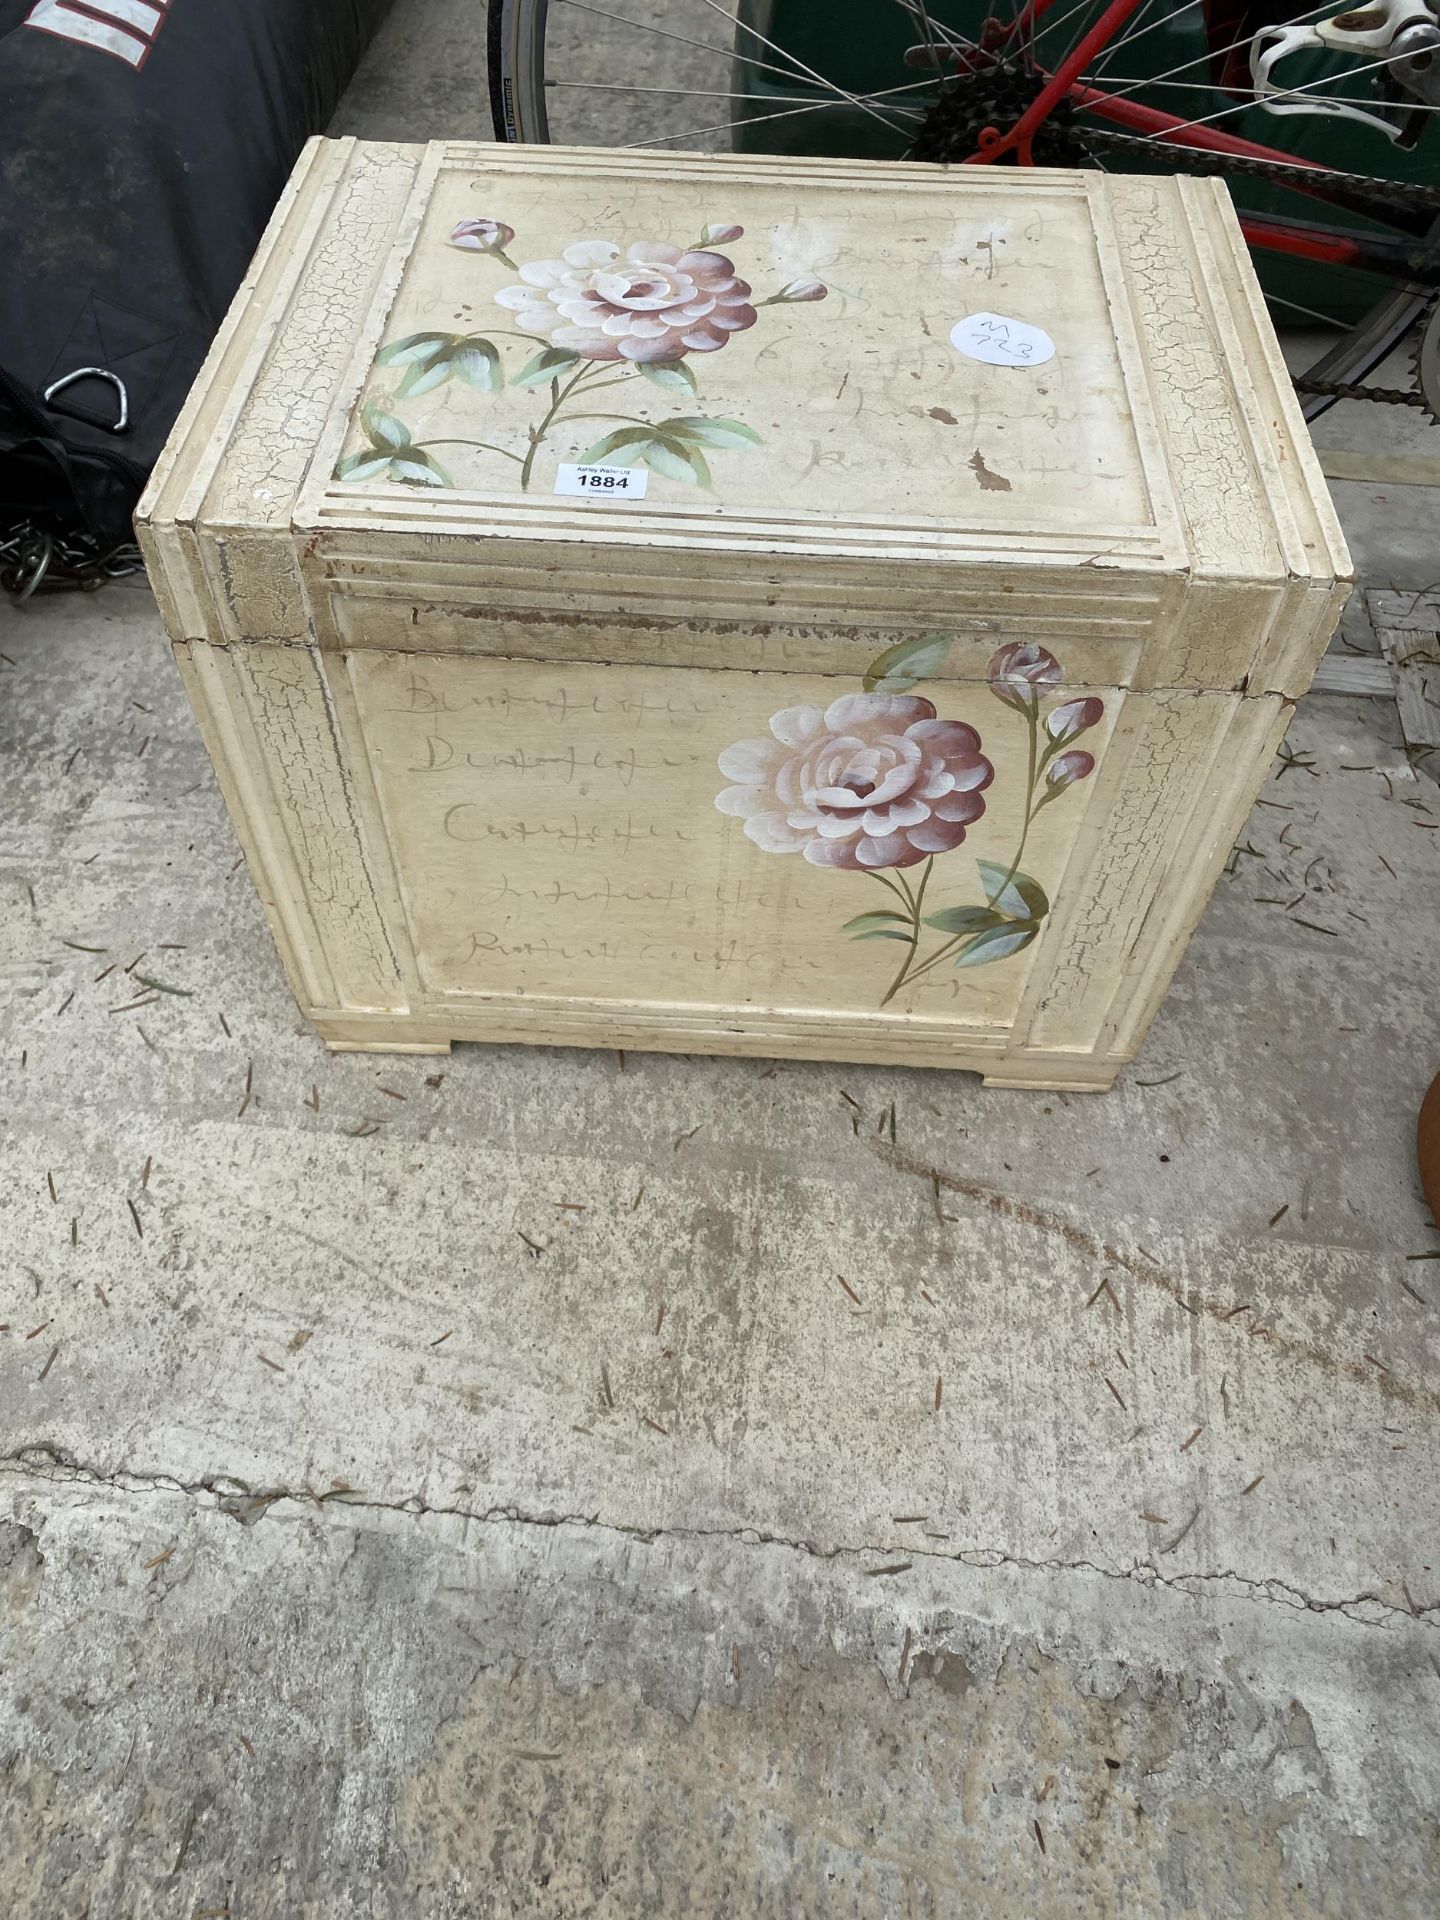 A WOODEN PAINTED LIDDED STORAGE BOX